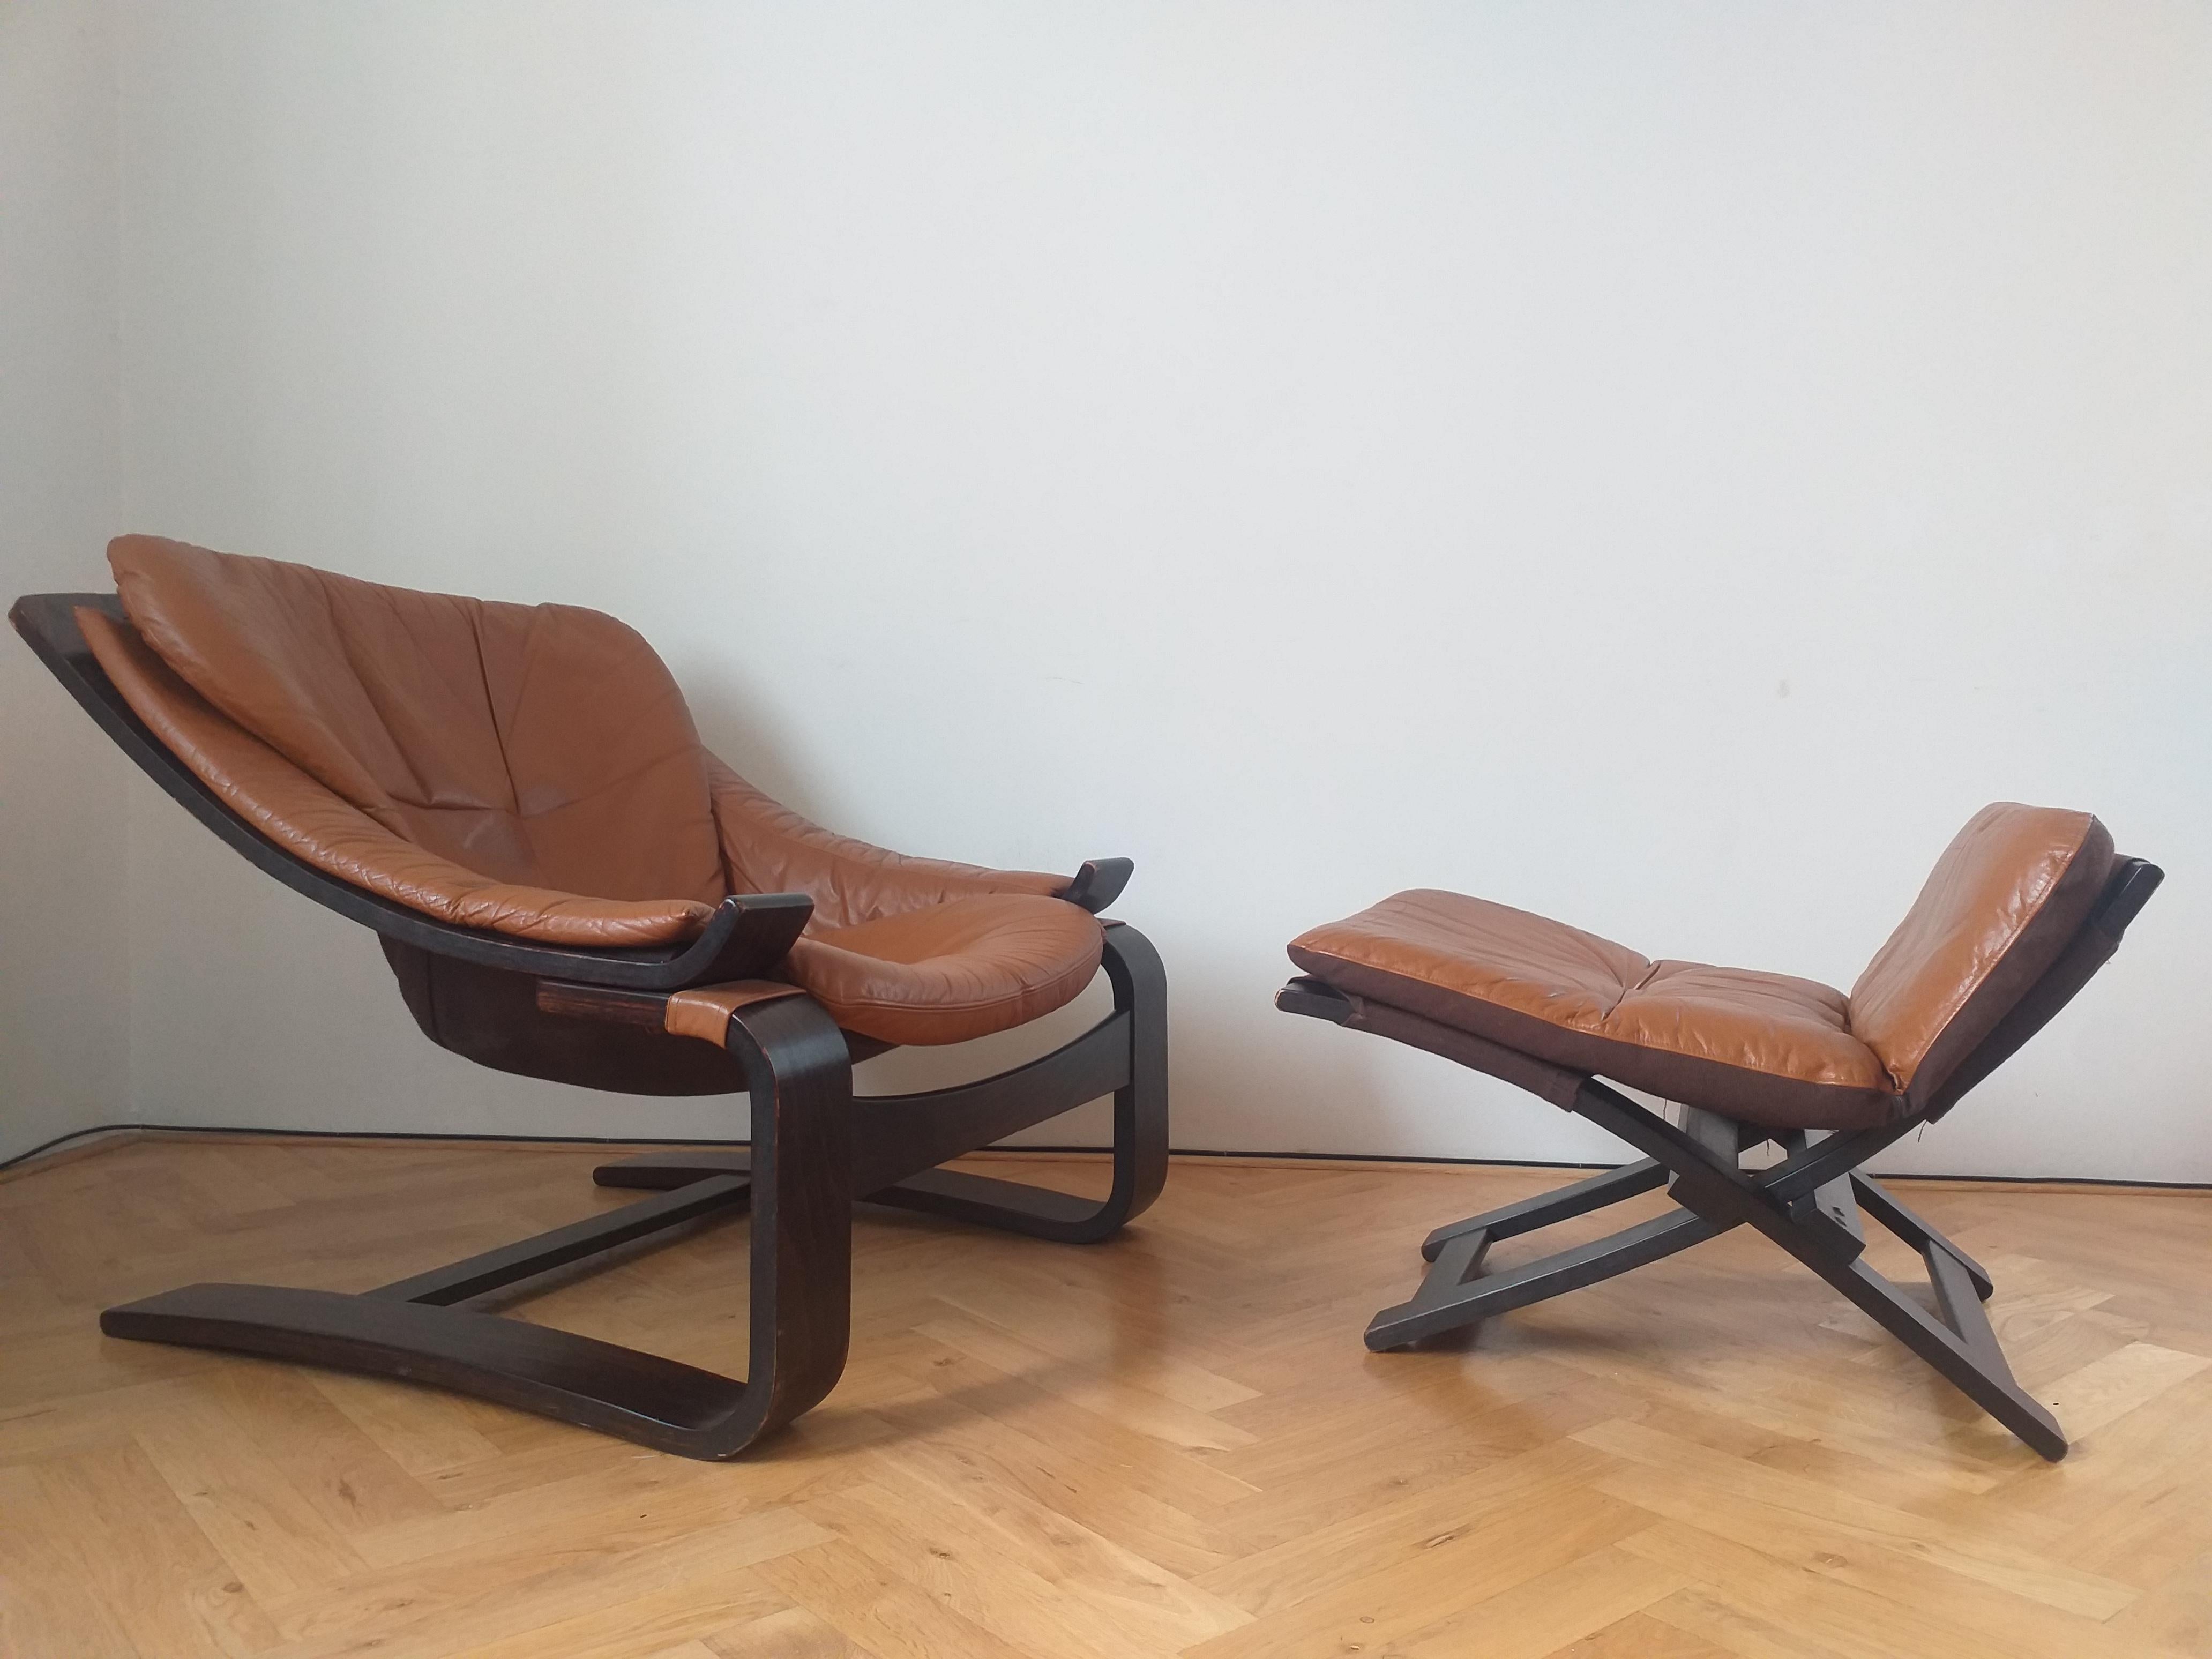 Midcentury Lounge Chair Kroken with Ottoman, Ake Fribytter, Nelo, Sweden, 1970s For Sale 5